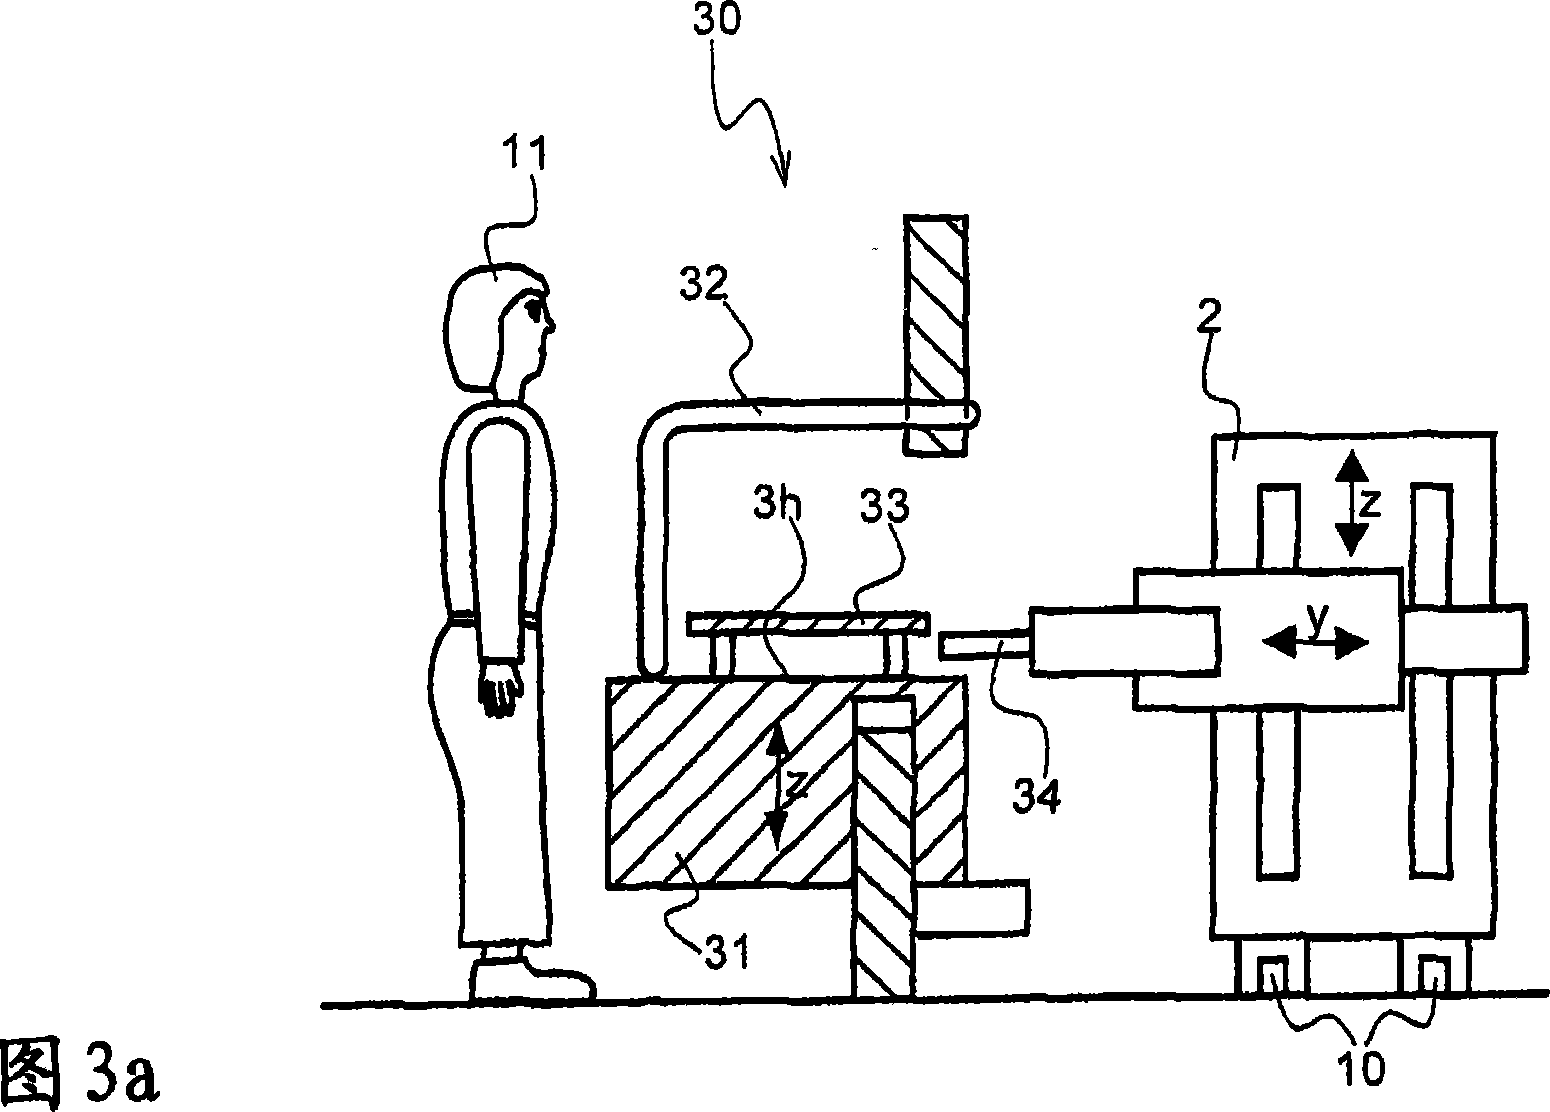 Work cell for assembling units of workpieces on pallets and method for operating the same